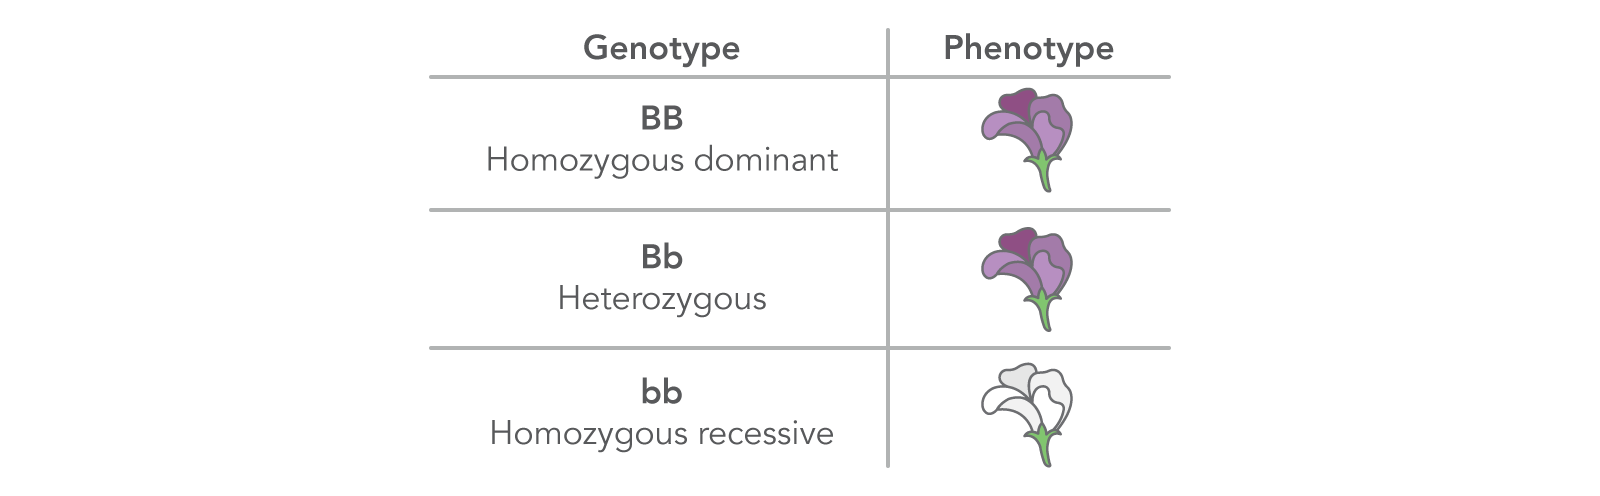 <p>The genotype of an organism with two recessive alleles</p>